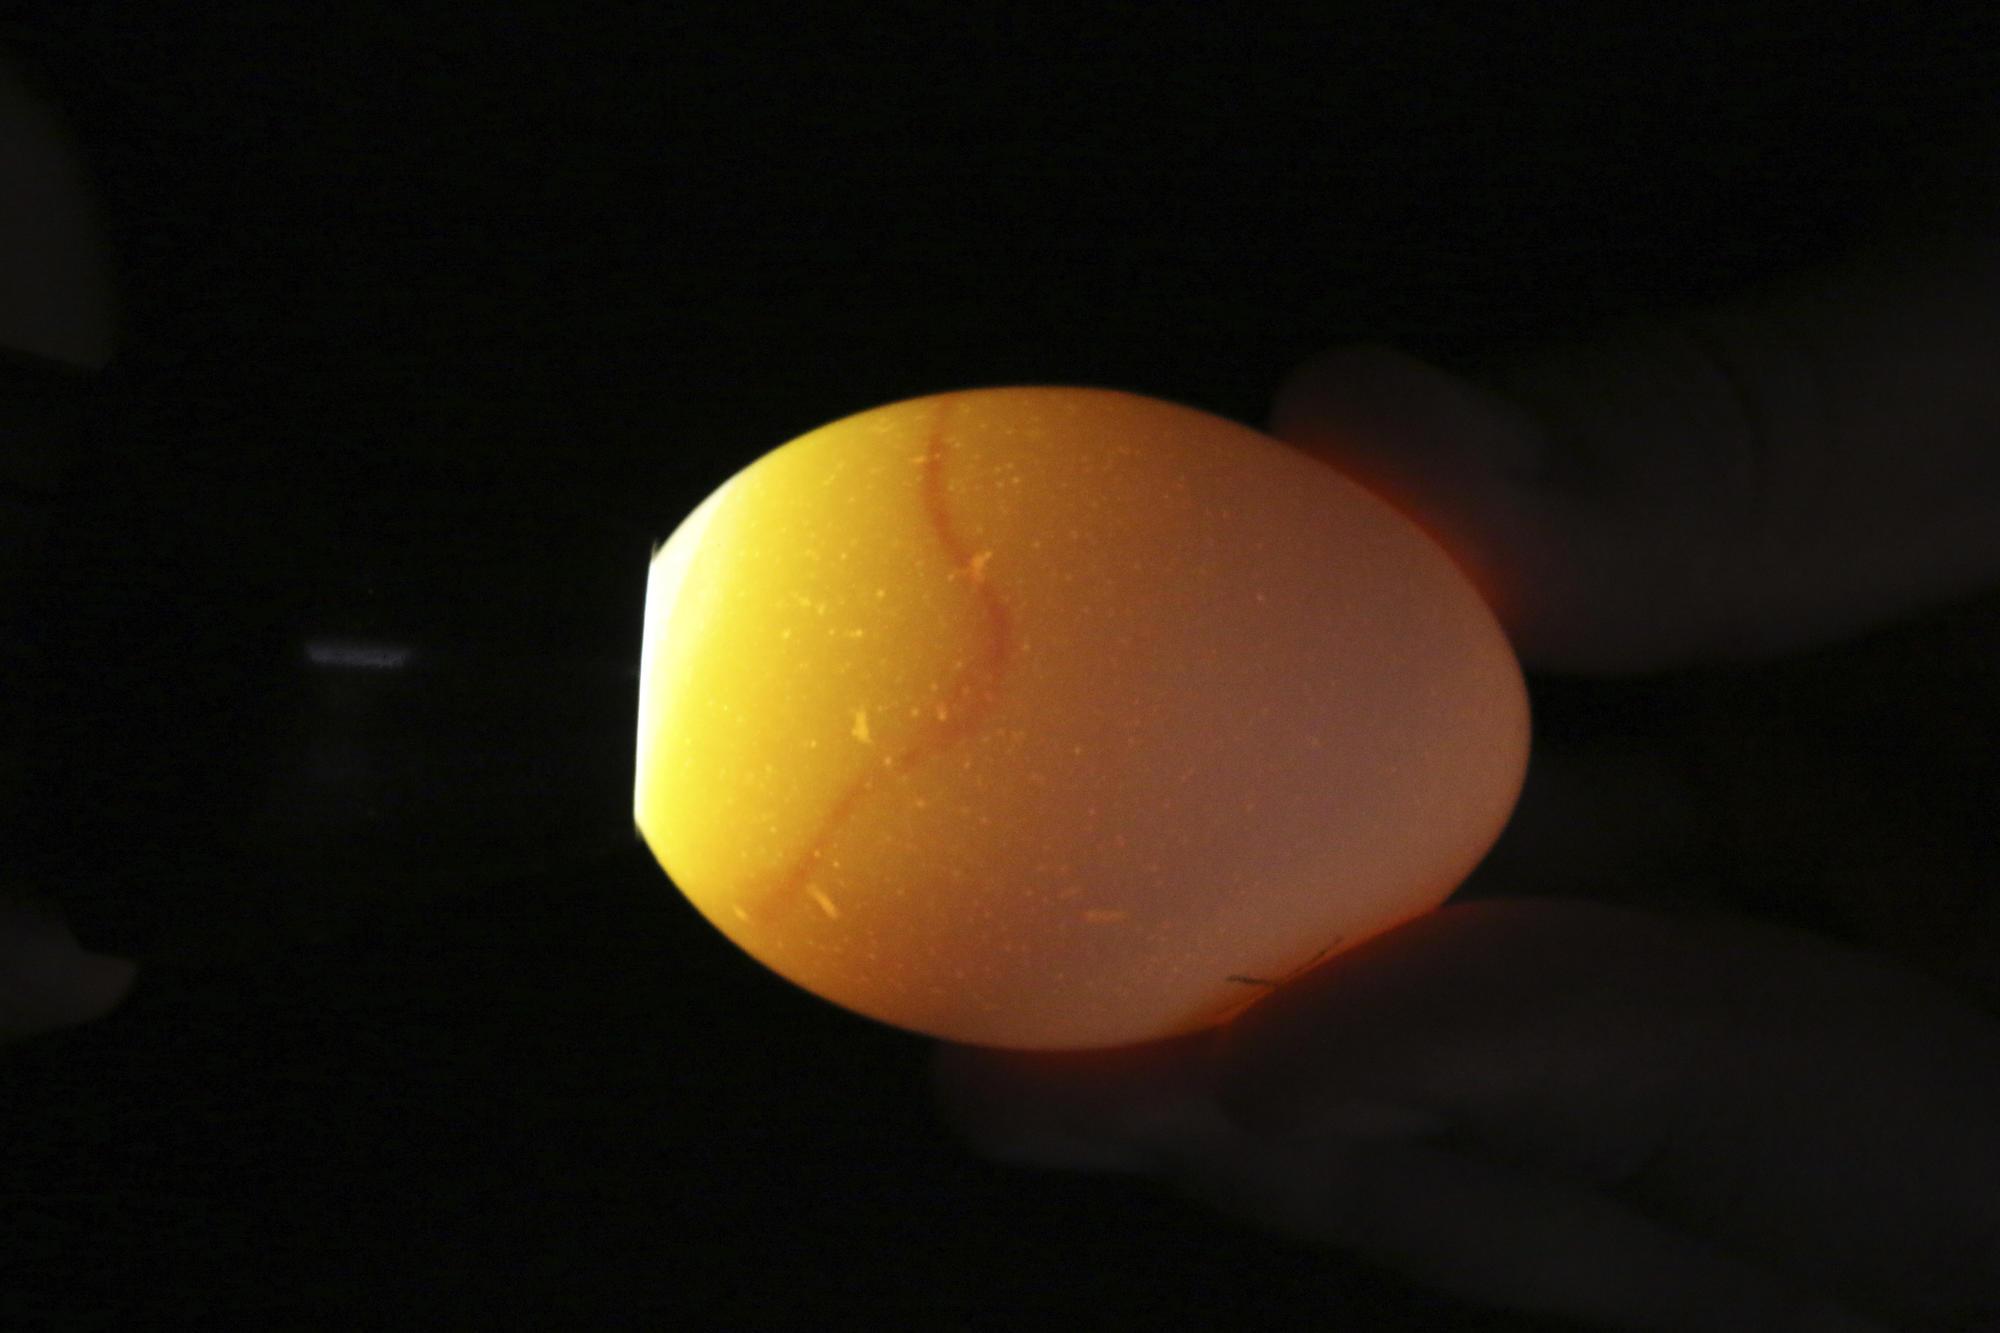 Egg with faint color showing blood ring at one end